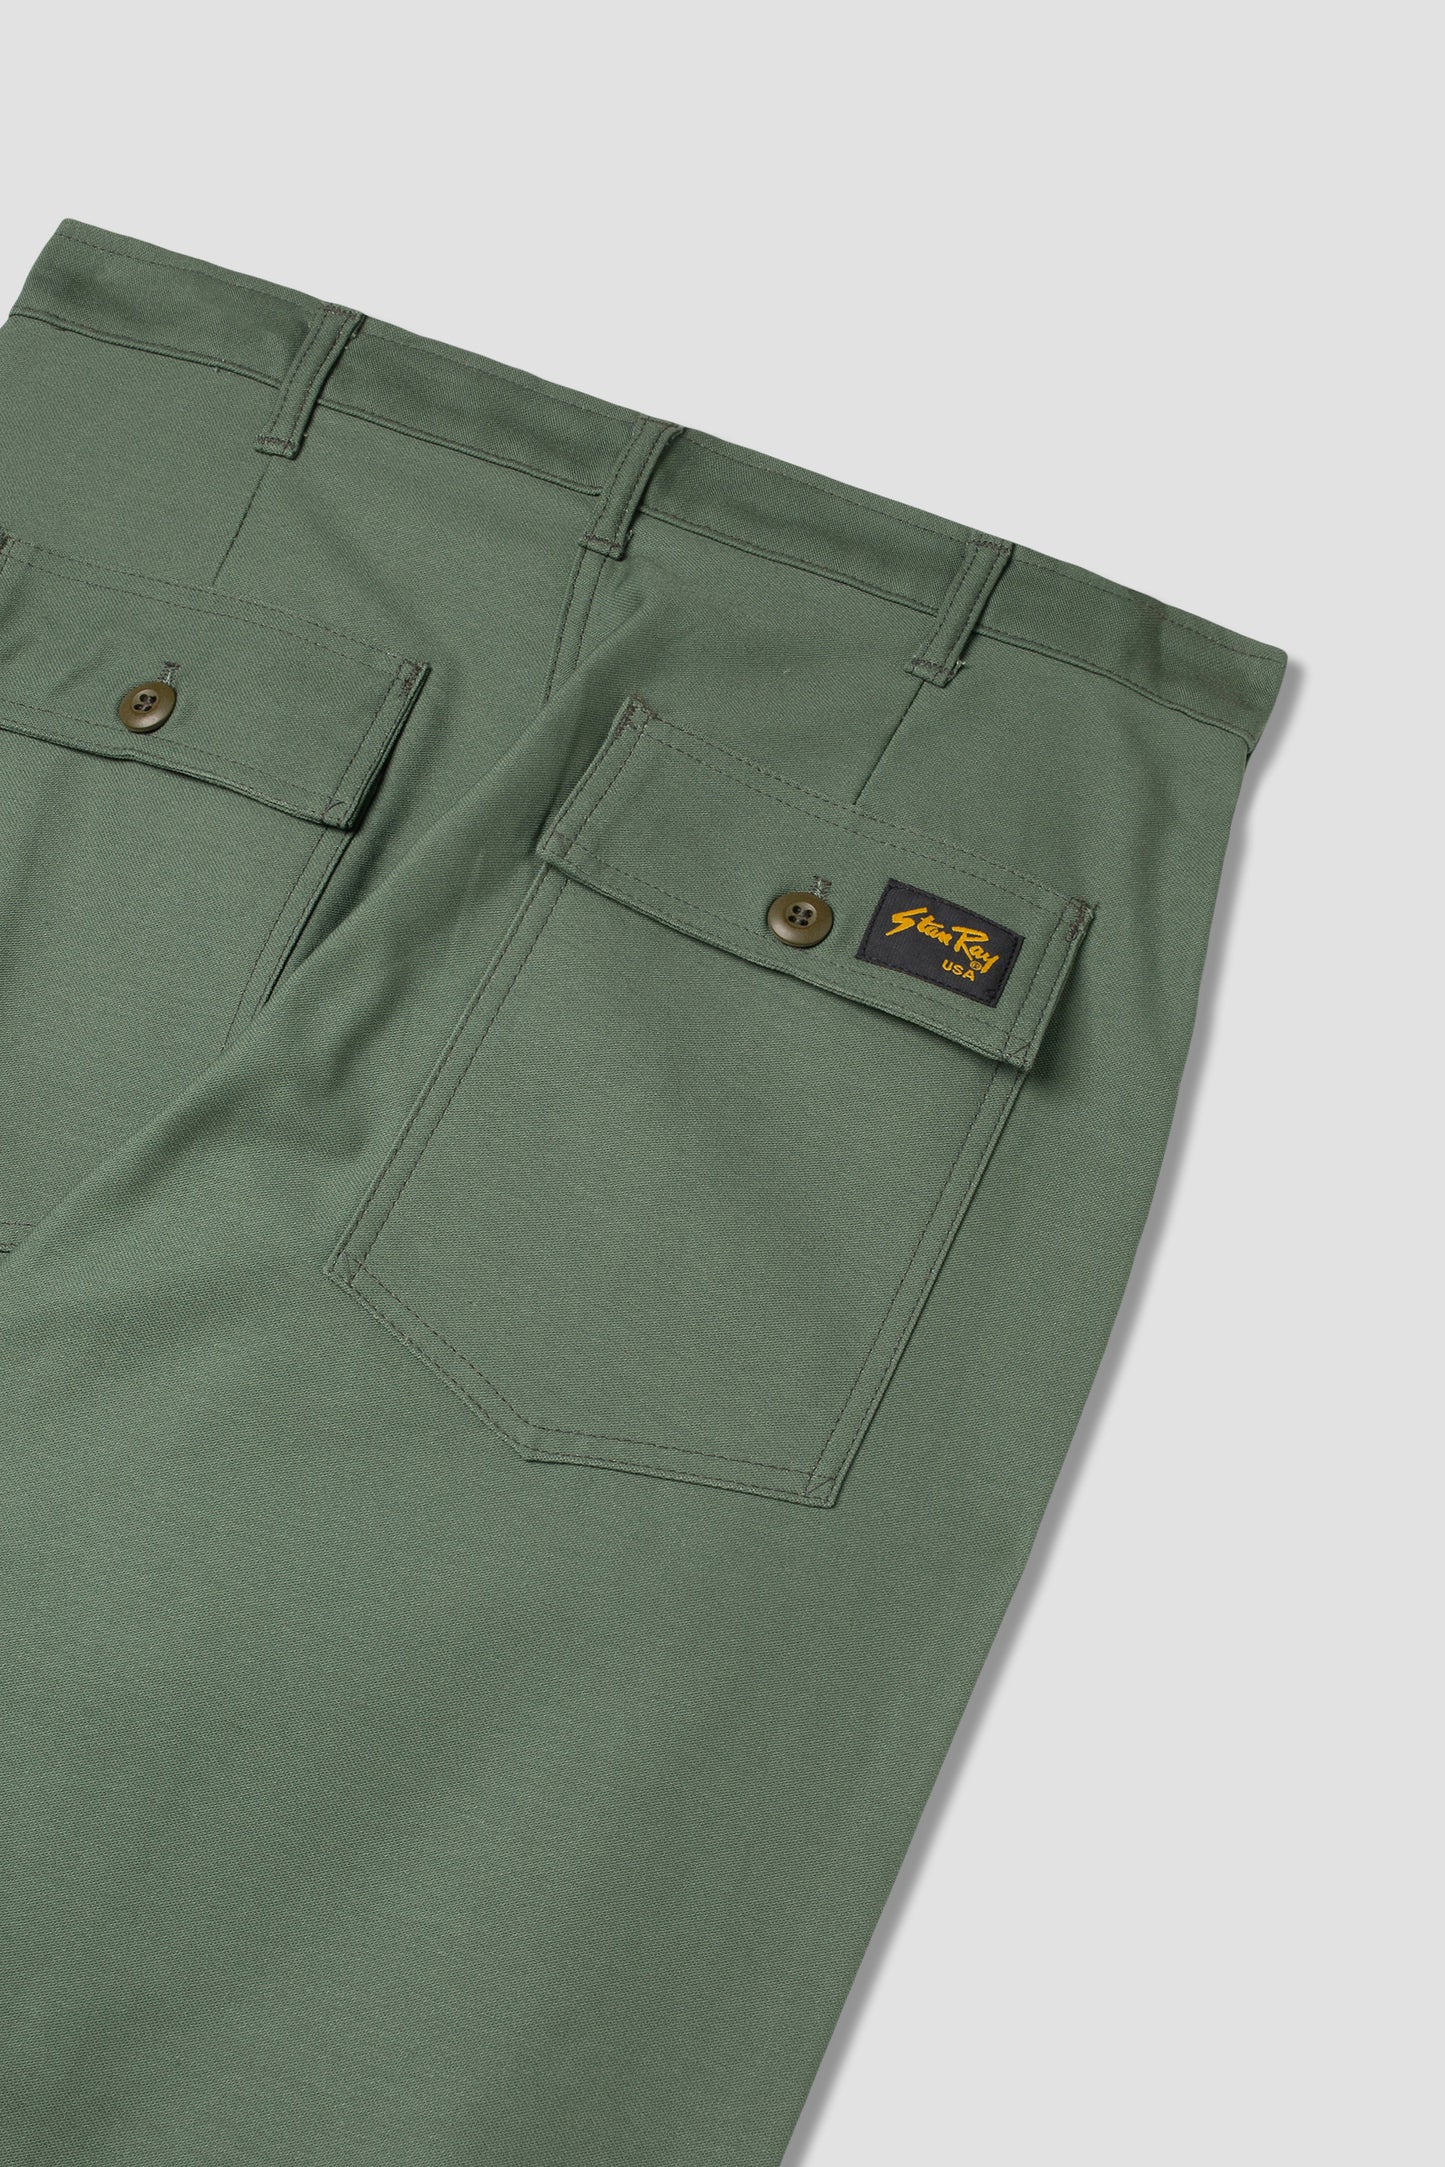 Taper Fatigue (Olive Sateen 8.5oz) - Stan Ray